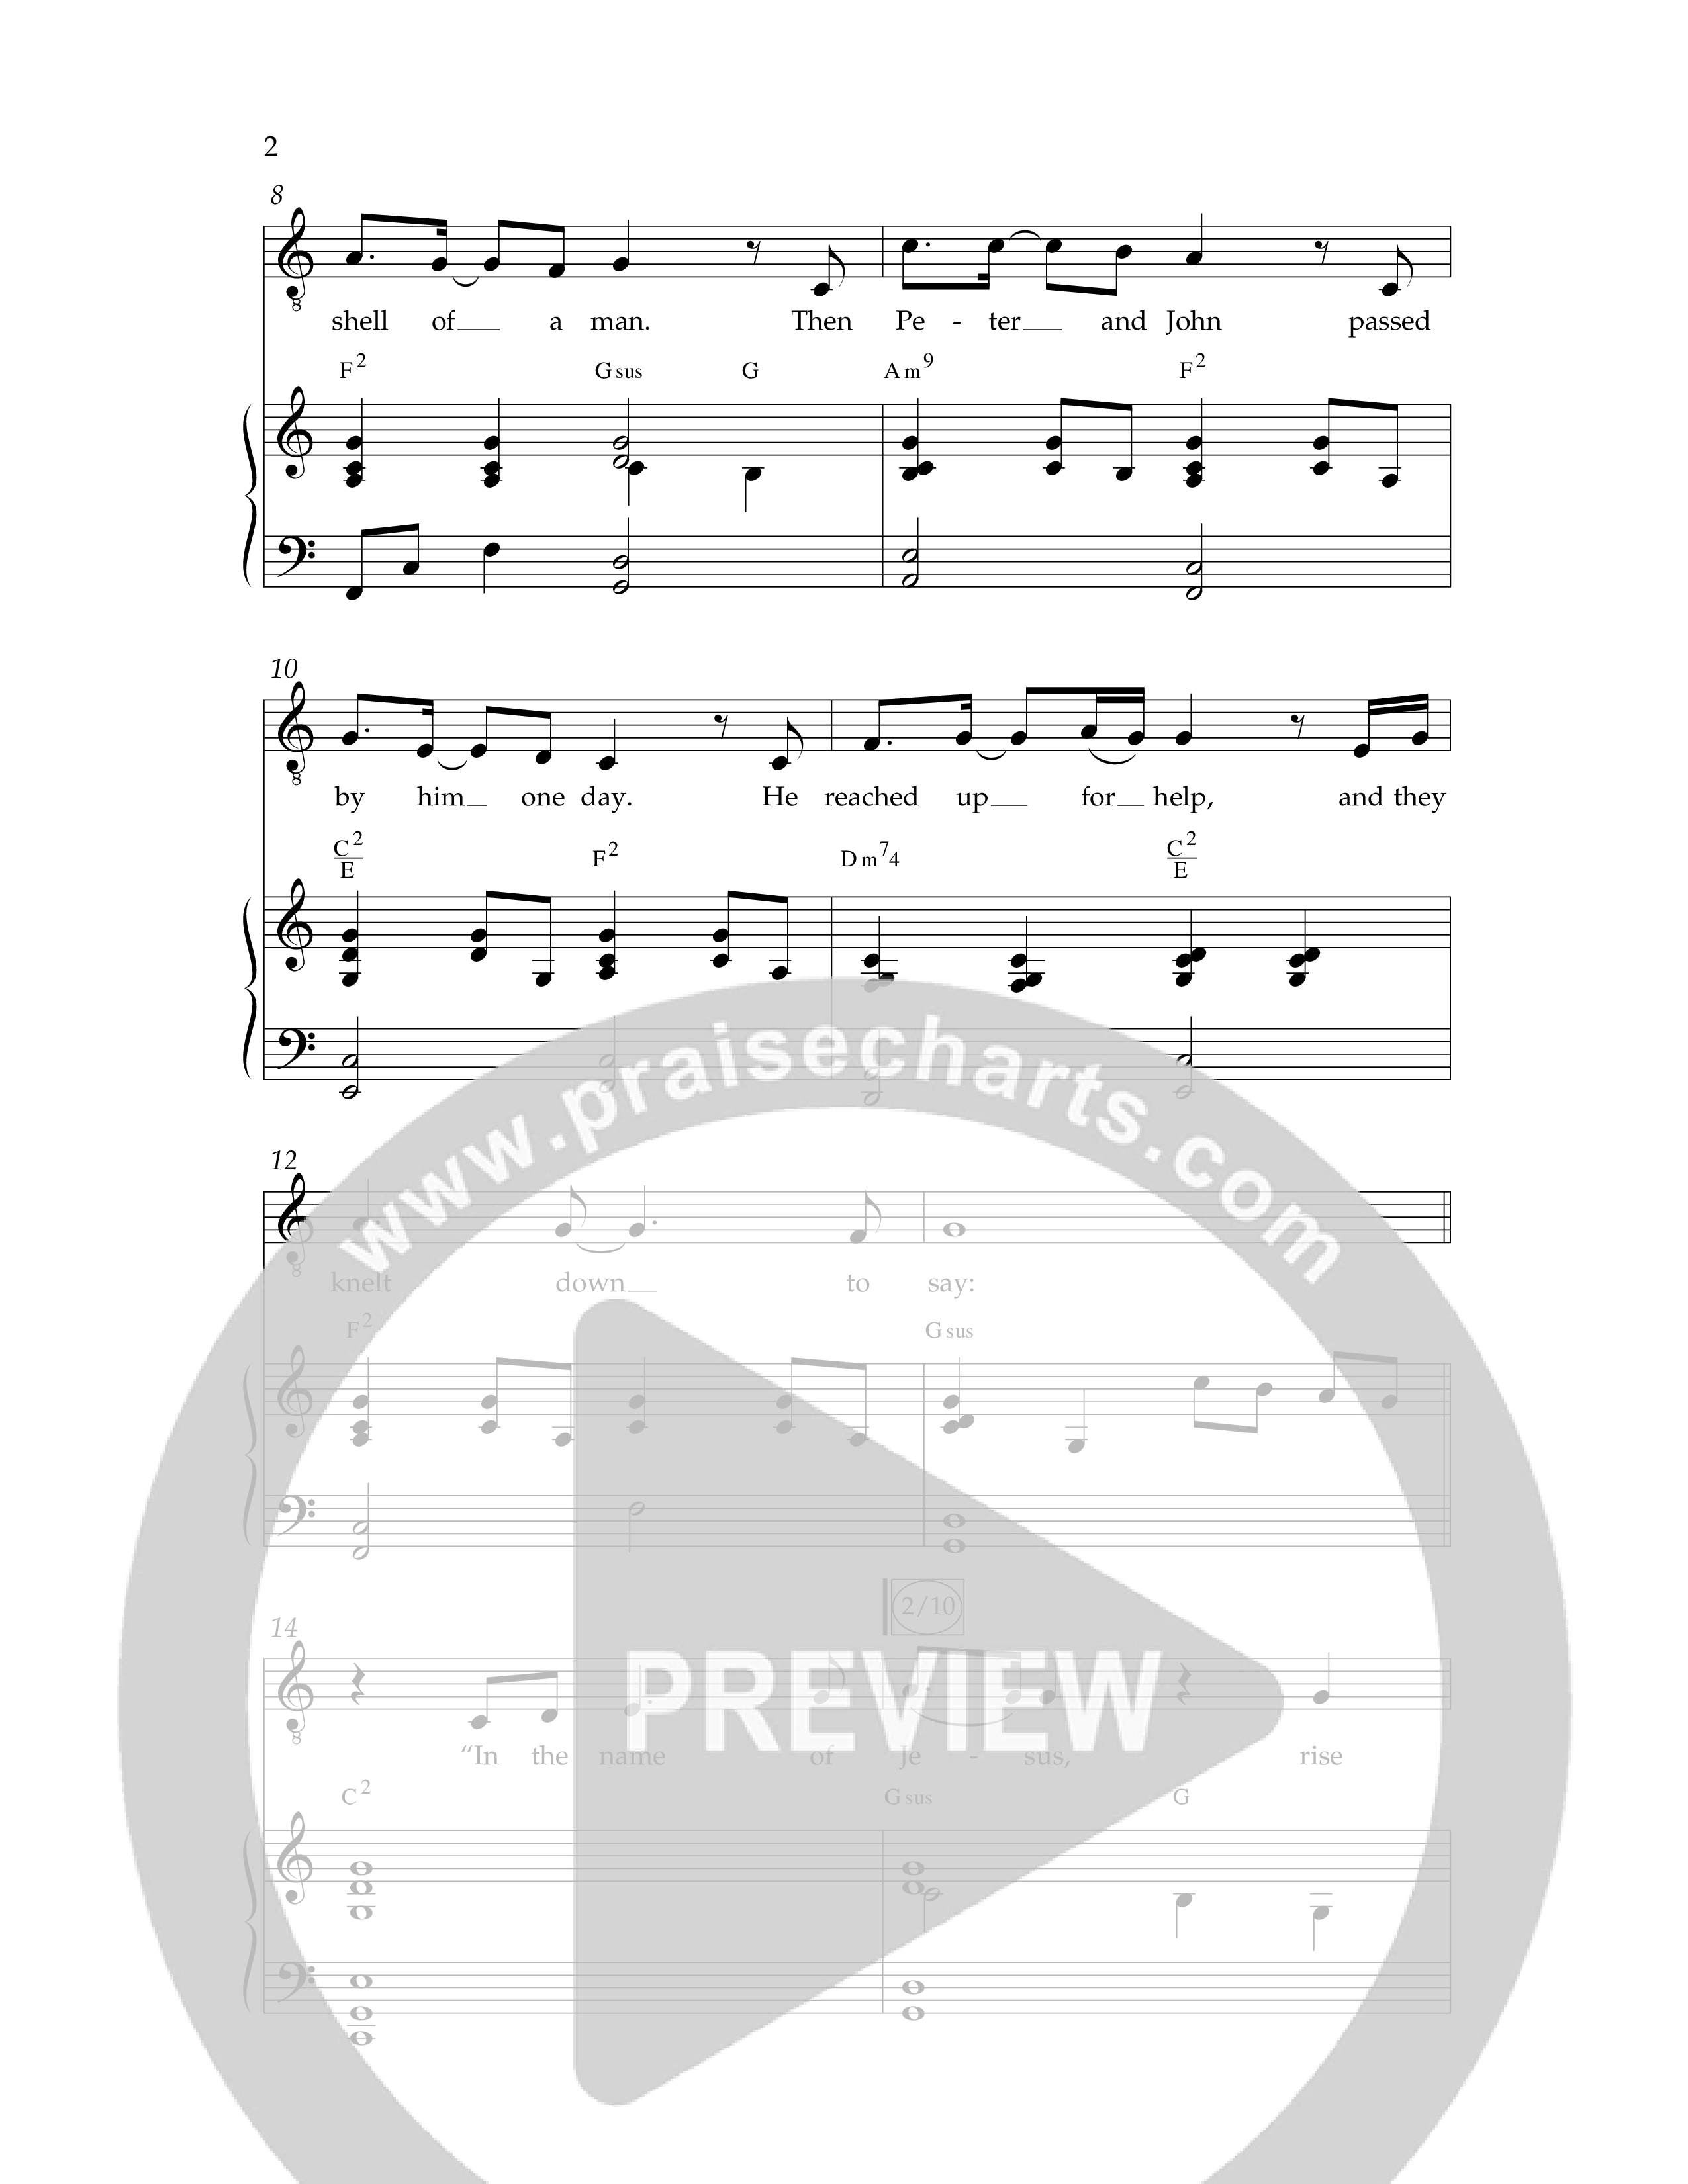 In The Name Of Jesus (Choral Anthem SATB) Anthem (SATB/Piano) (Lifeway Choral / Arr. Jay Rouse)